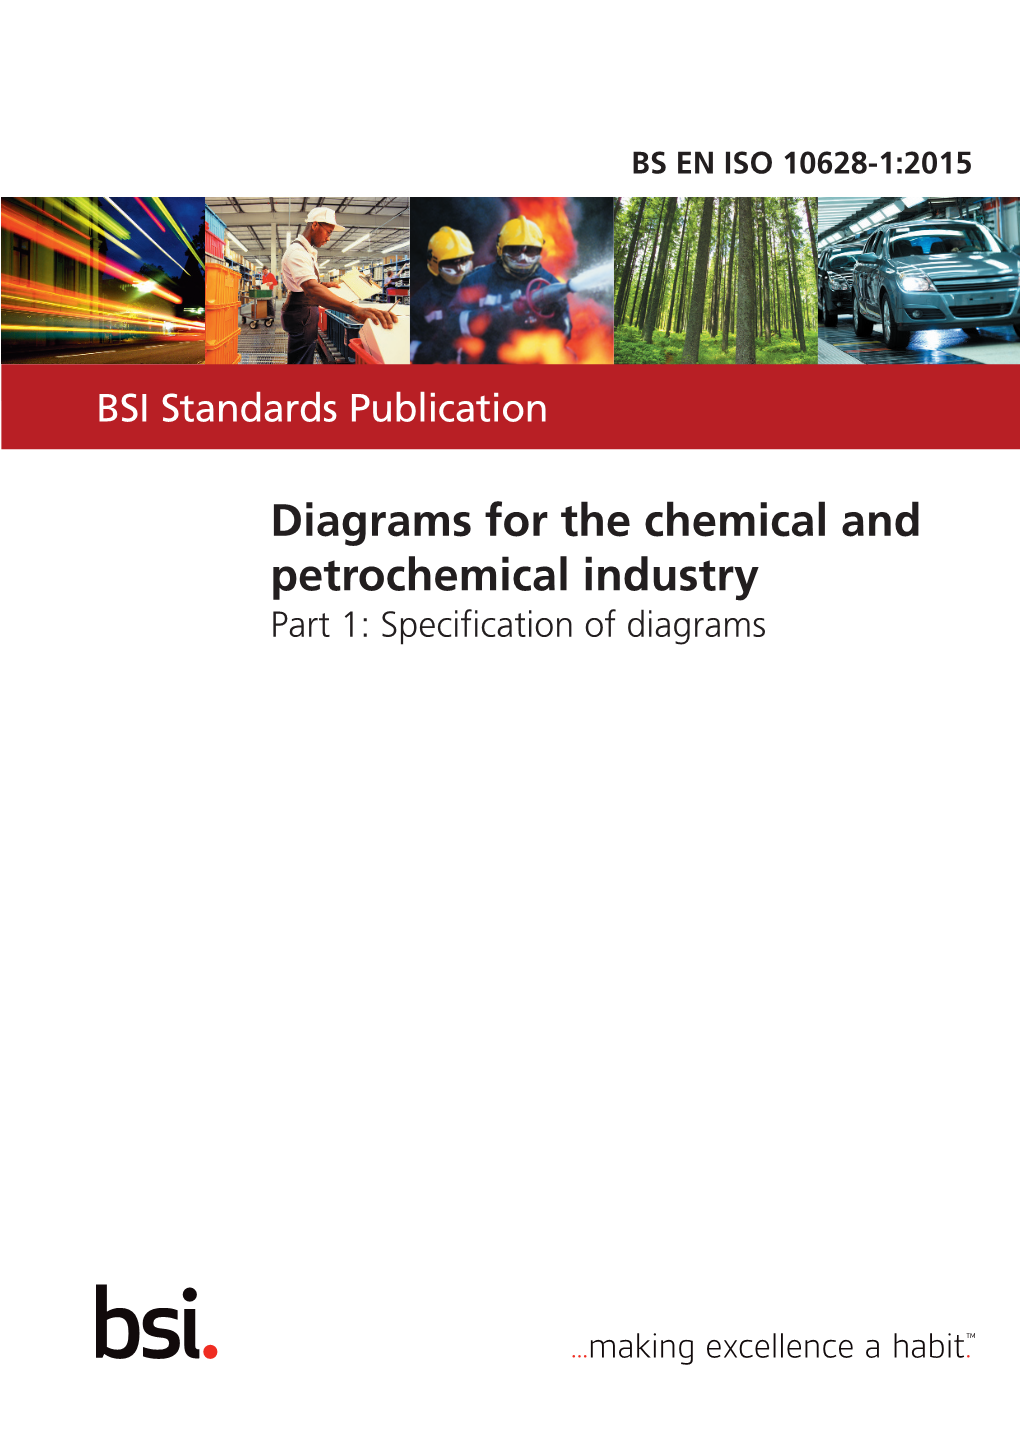 Diagrams for the Chemical and Petrochemical Industry Part 1: Specification of Diagrams BS EN ISO 10628-1:2015 BRITISH STANDARD